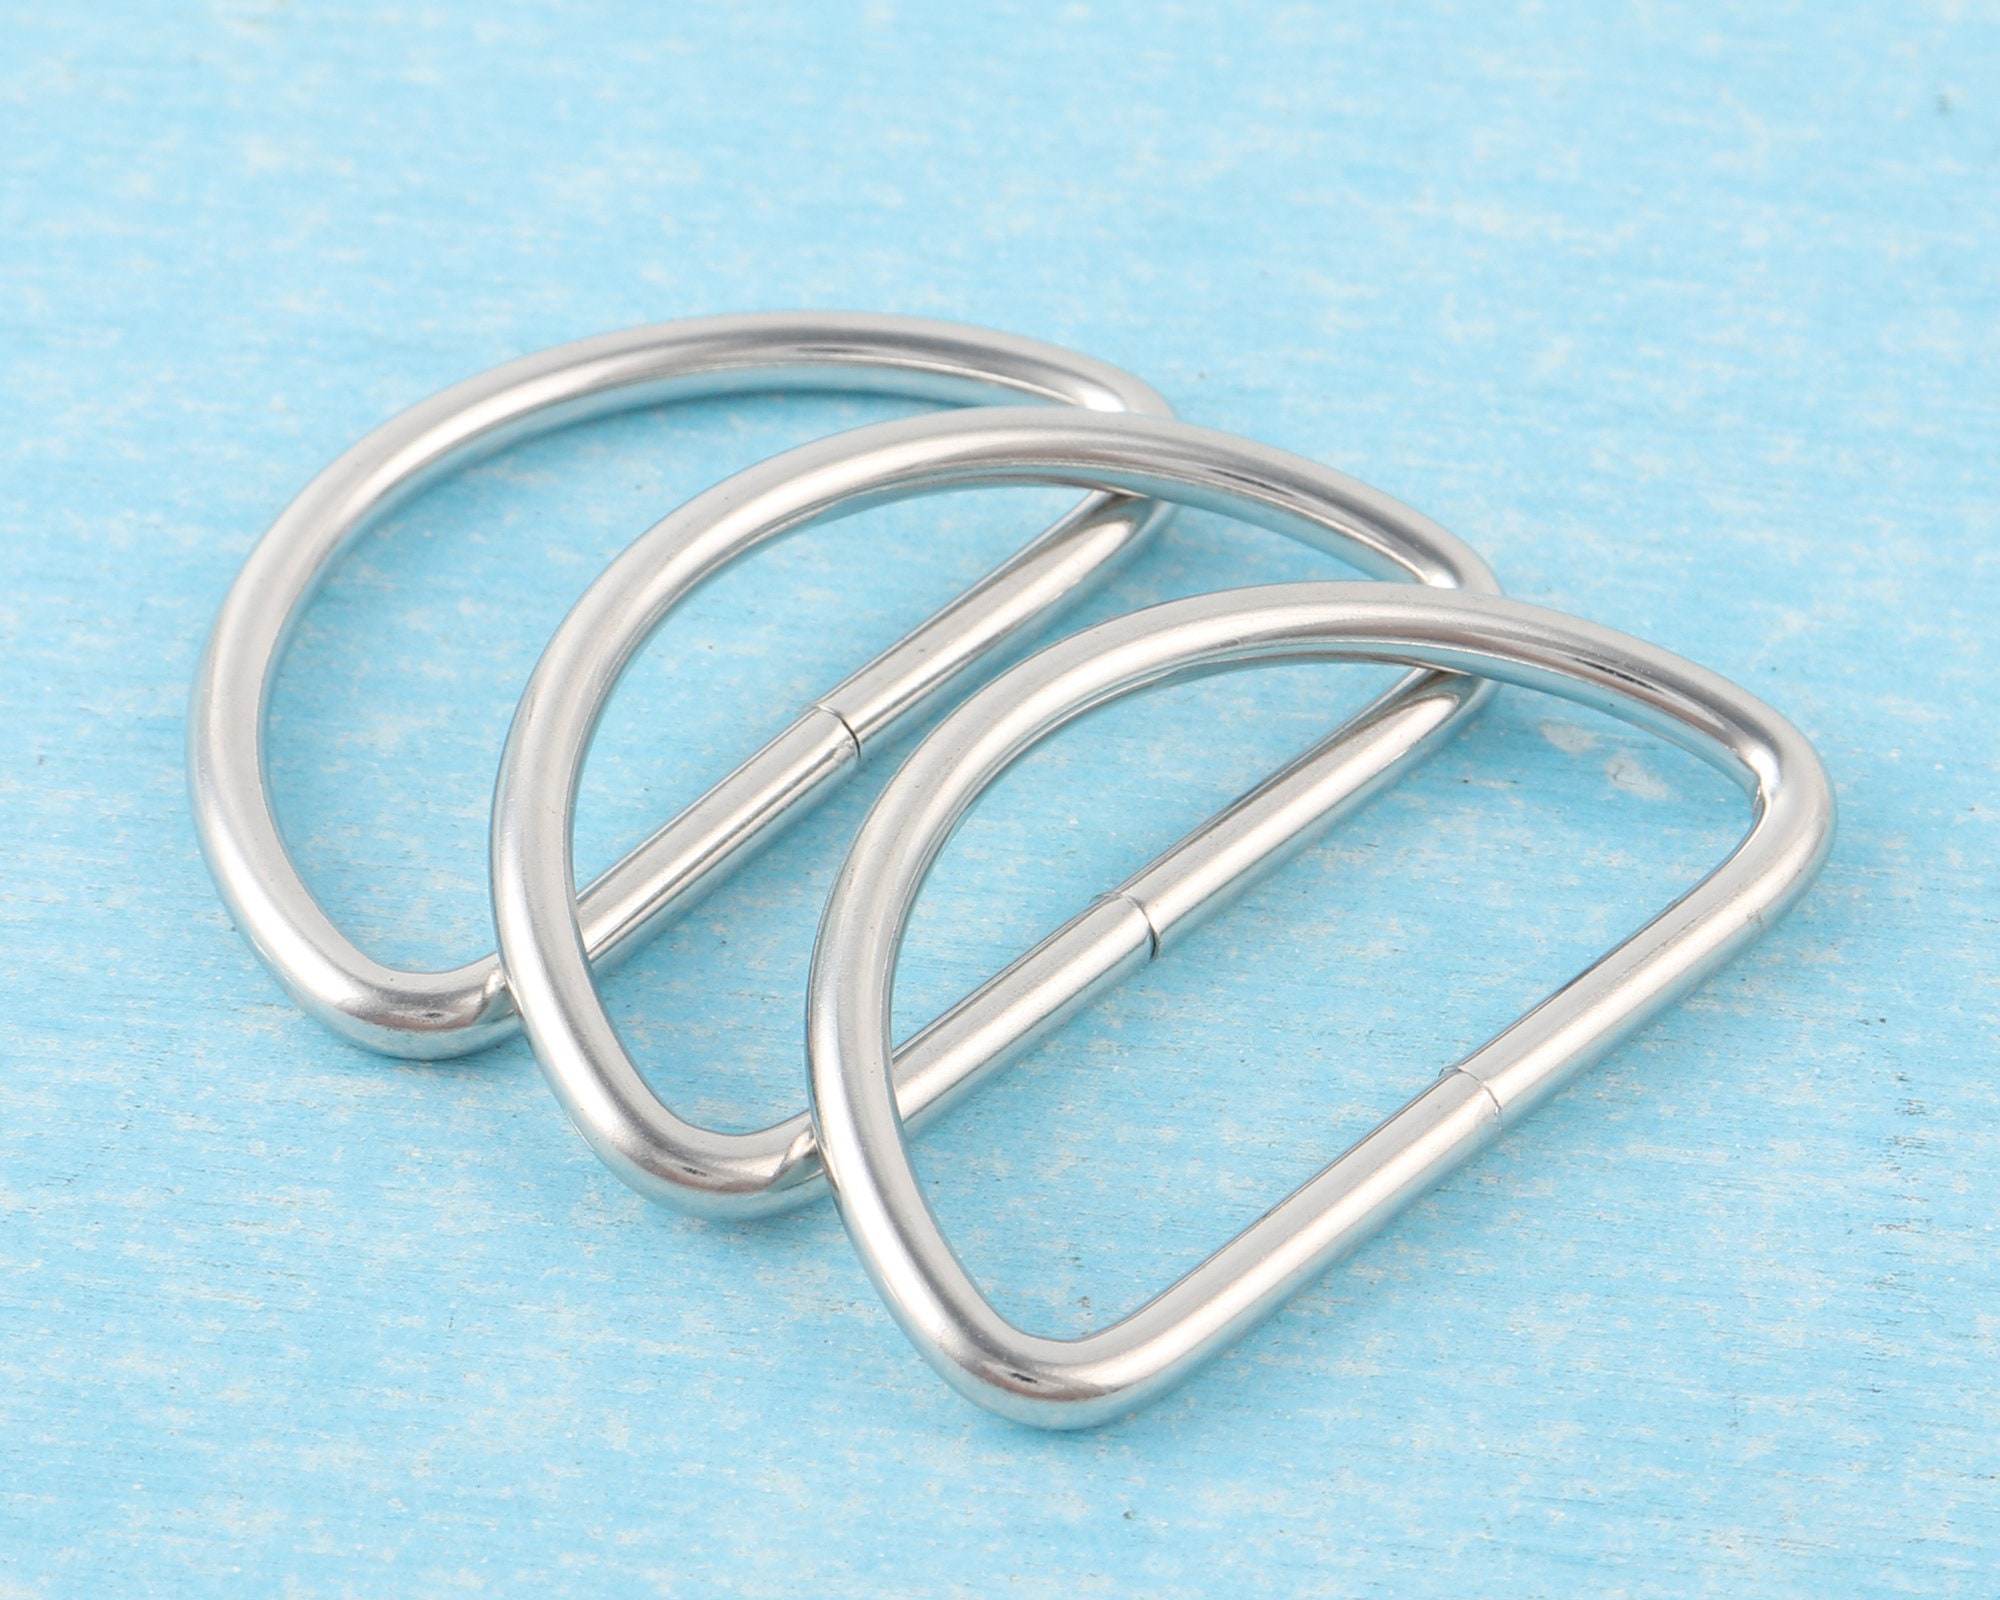 Buy 4-10 Pack 1.5 Metal D Rings for Purse Strap Hardware,38mm Inner  Connection Non Welded D Buckles for Webbing Belts Lanyard Leather Craft  Online in India 